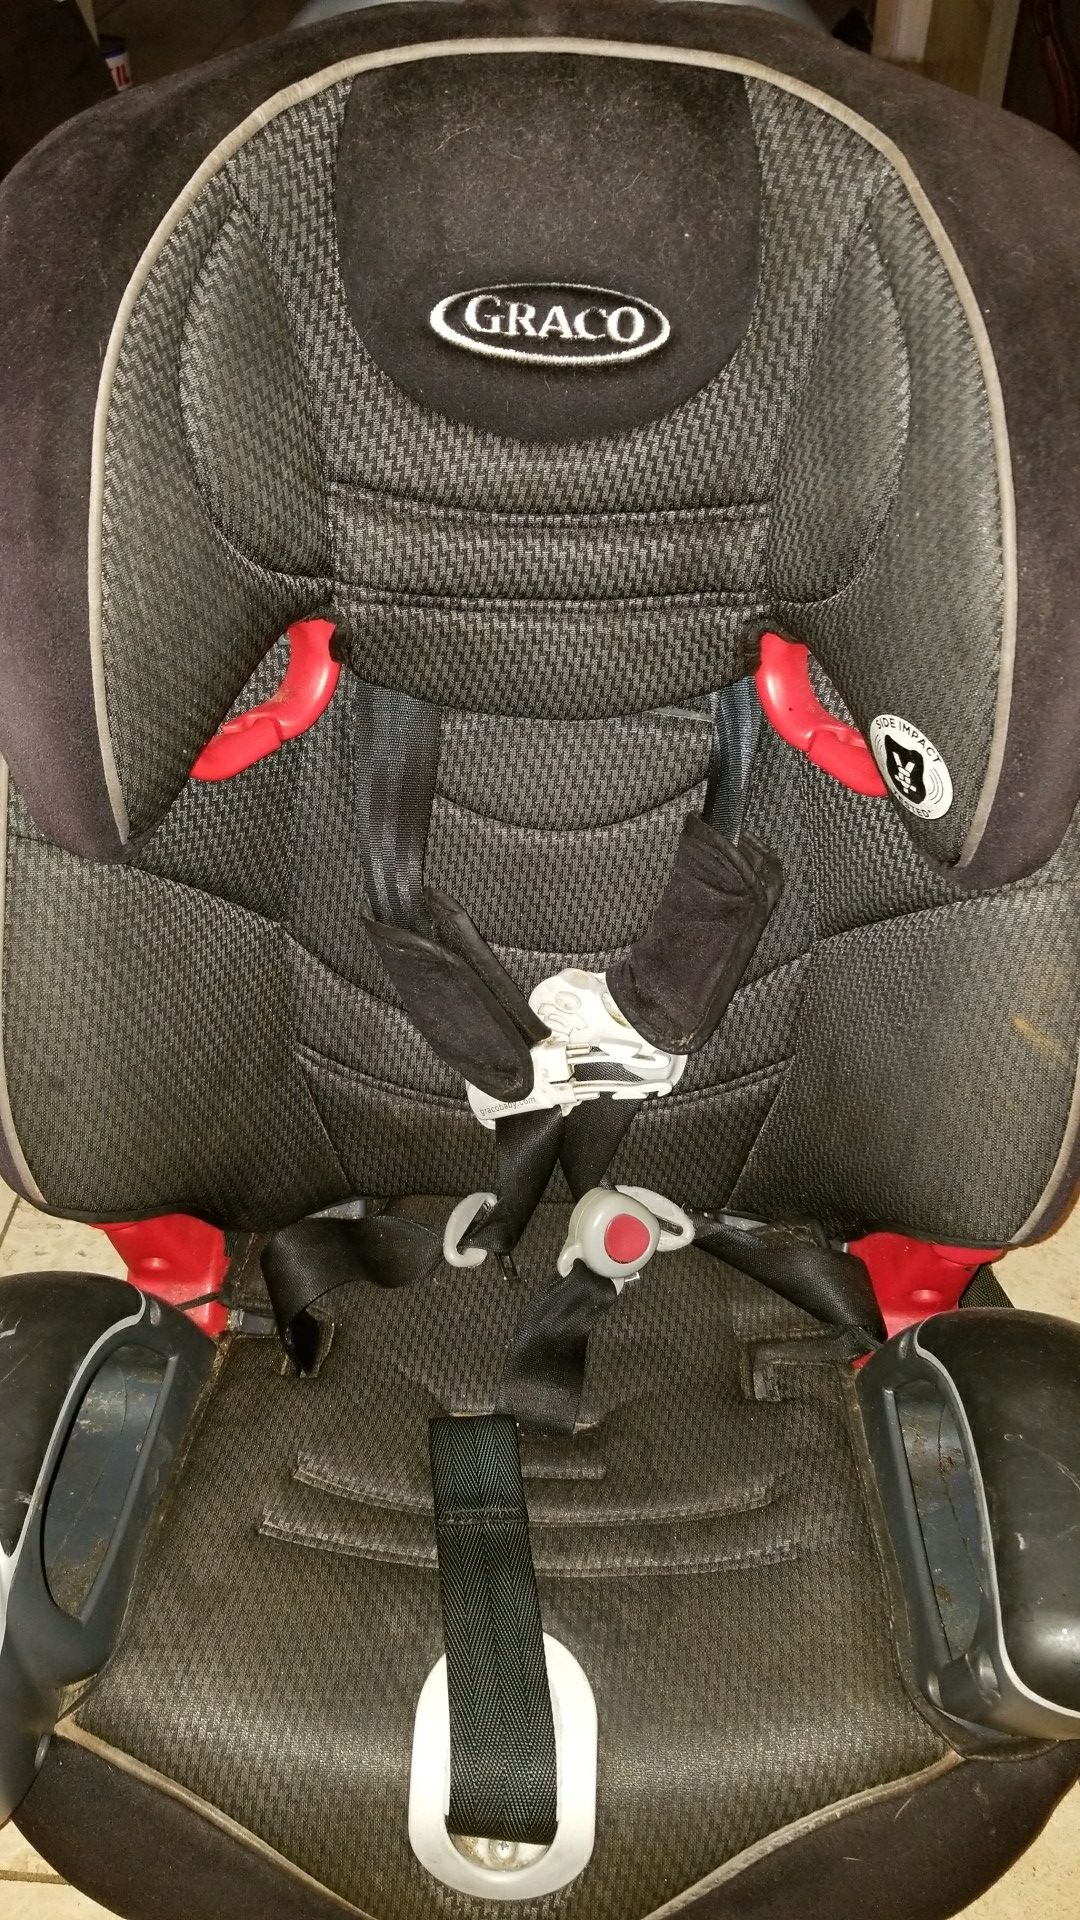 Greco baby child 3 in 1 stages car seat